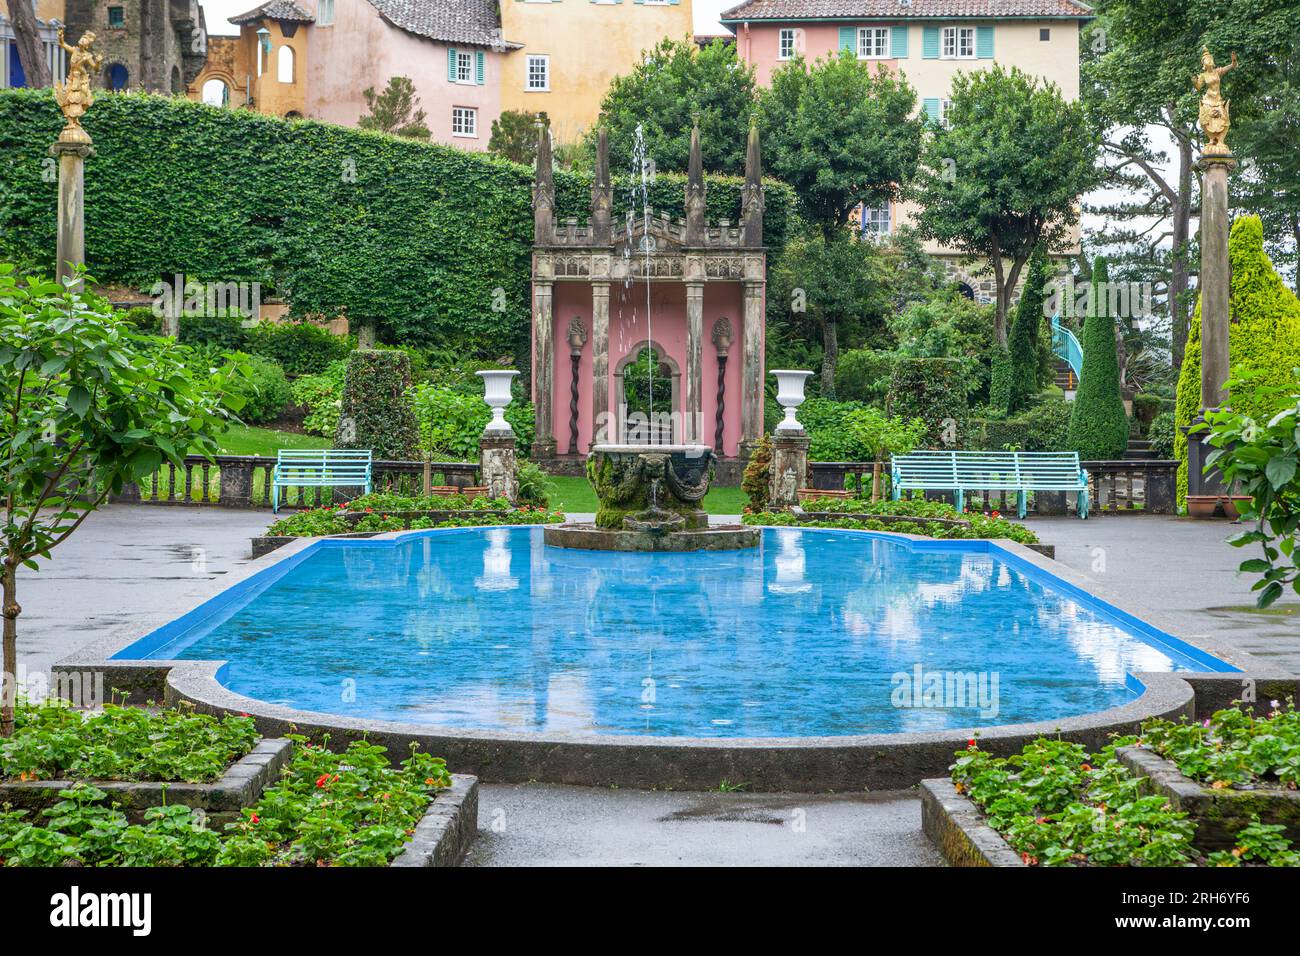 Portmeirion is a folly tourist village in Gwynedd (historically in Merionethshire), North Wales. Stock Photo